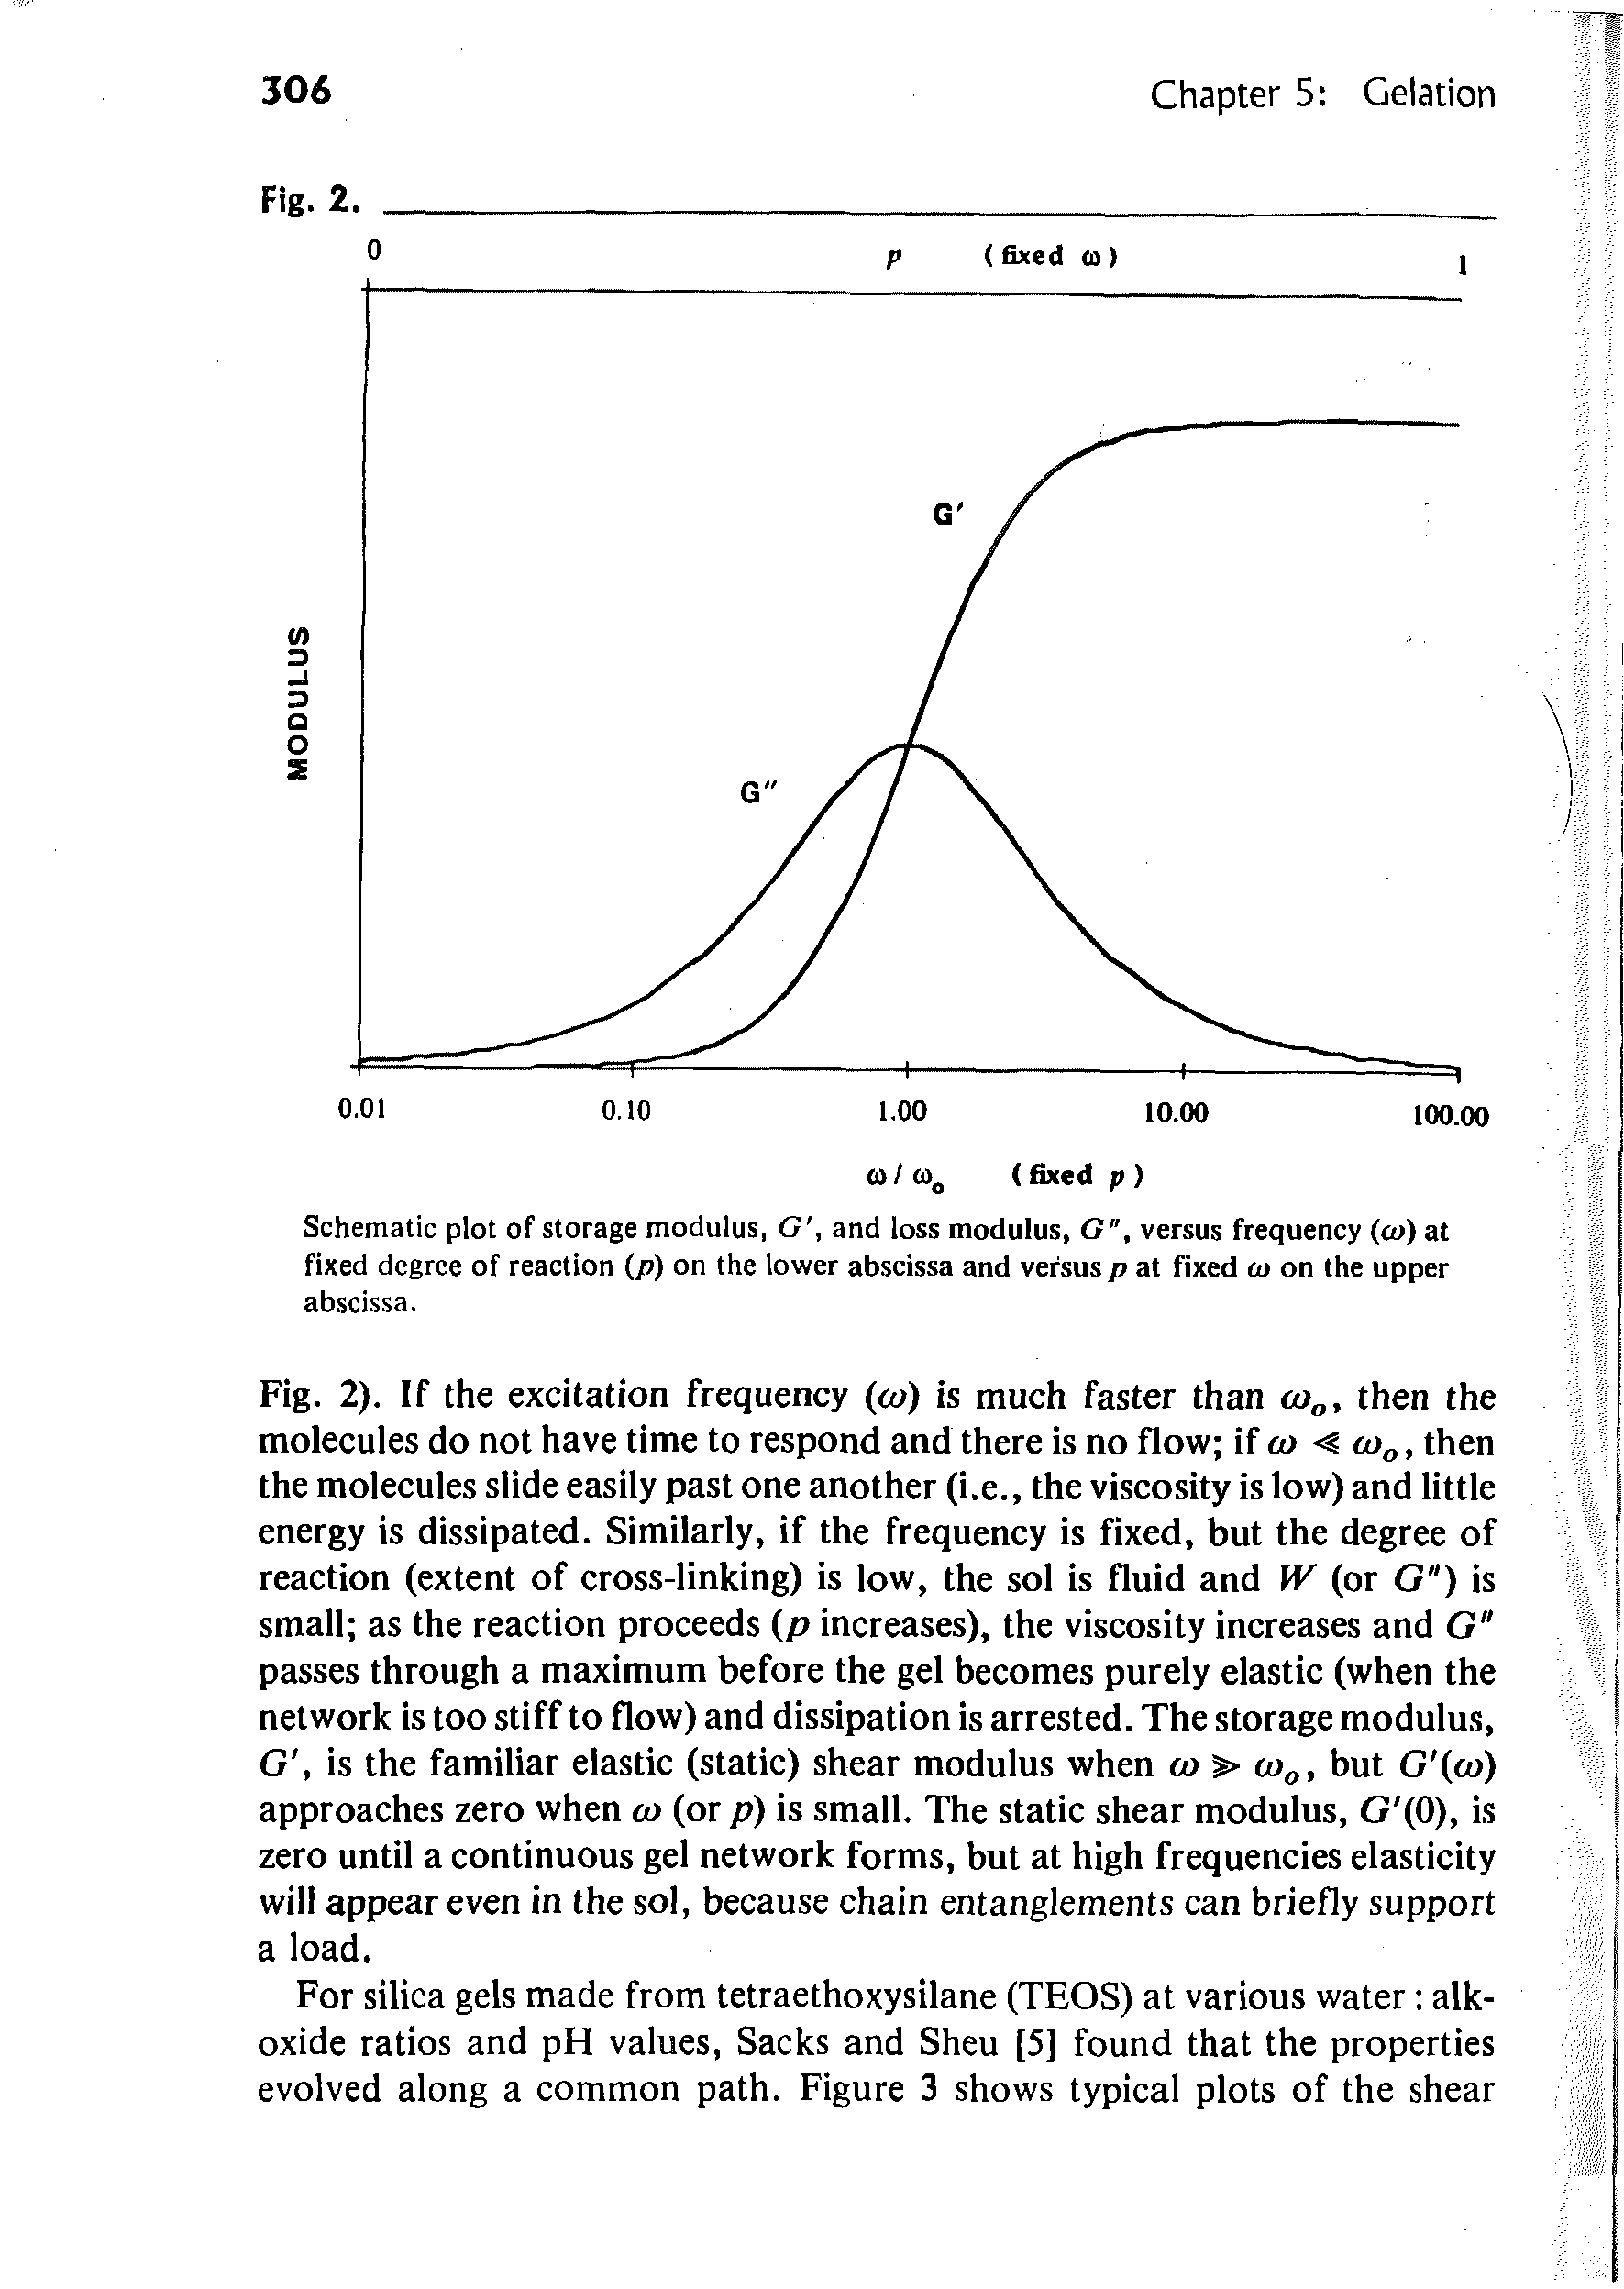 Fig. 2). If the excitation frequency (oj) is much faster than tu , then the molecules do not have time to respond and there is no flow if to < o , then the molecules slide easily past one another (i.e., the viscosity is low) and little energy is dissipated. Similarly, if the frequency is fixed, but the degree of reaction (extent of cross-linking) is low, the sol is fluid and W (or G") is small as the reaction proceeds p increases), the viscosity increases and G" passes through a maximum before the gel becomes purely elastic (when the network is too stiff to flow) and dissipation is arrested. The storage modulus, G, is the familiar elastic (static) shear modulus when (o> u>o, but G (<o) approaches zero when (o (or p) is small. The static shear modulus, G (0), is zero until a continuous gel network forms, but at high frequencies elasticity will appear even in the sol, because chain entanglements can briefly support a load.